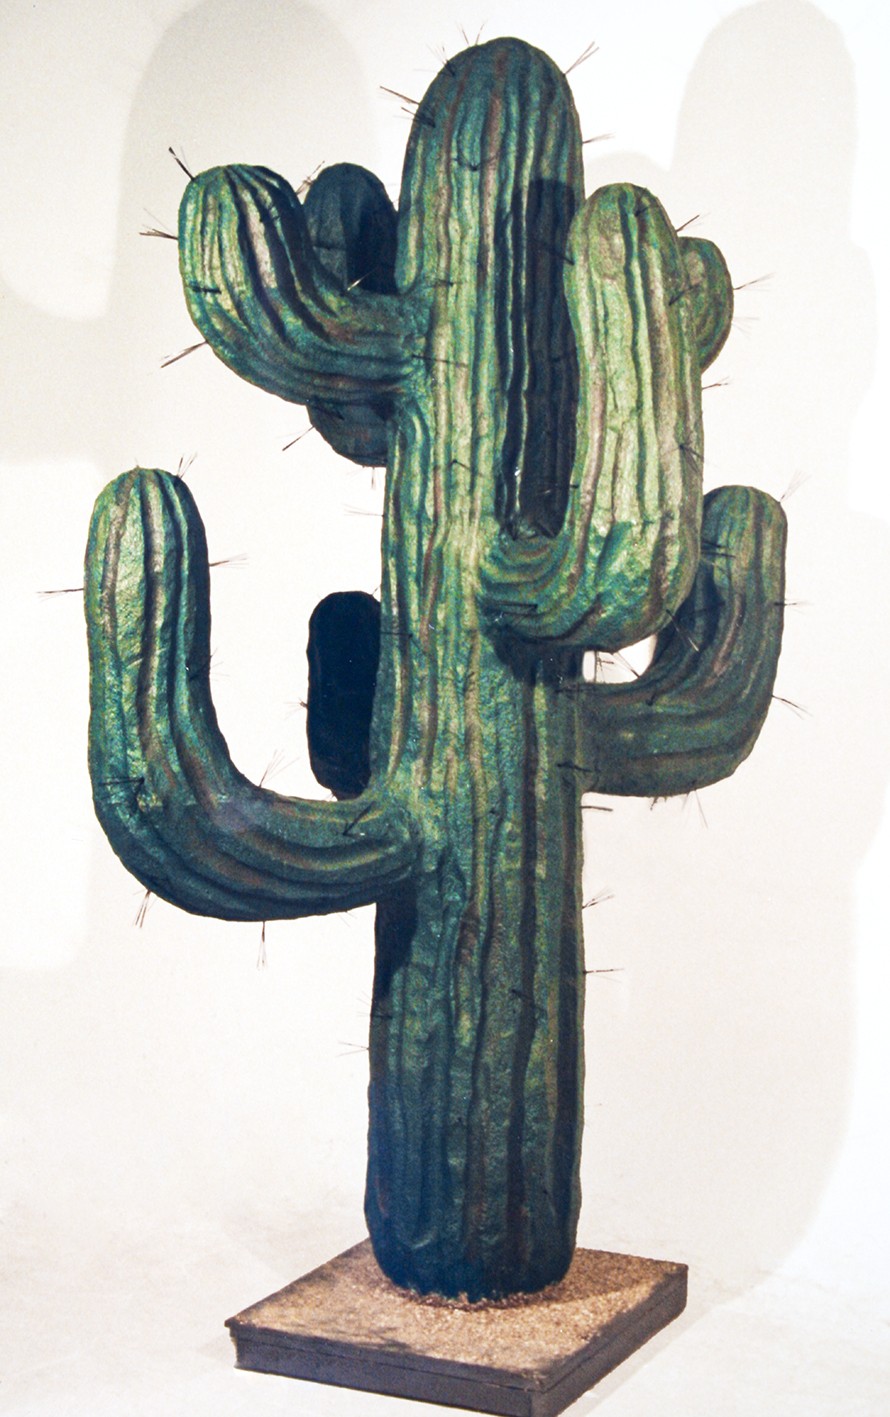 A green, large cactus with spines